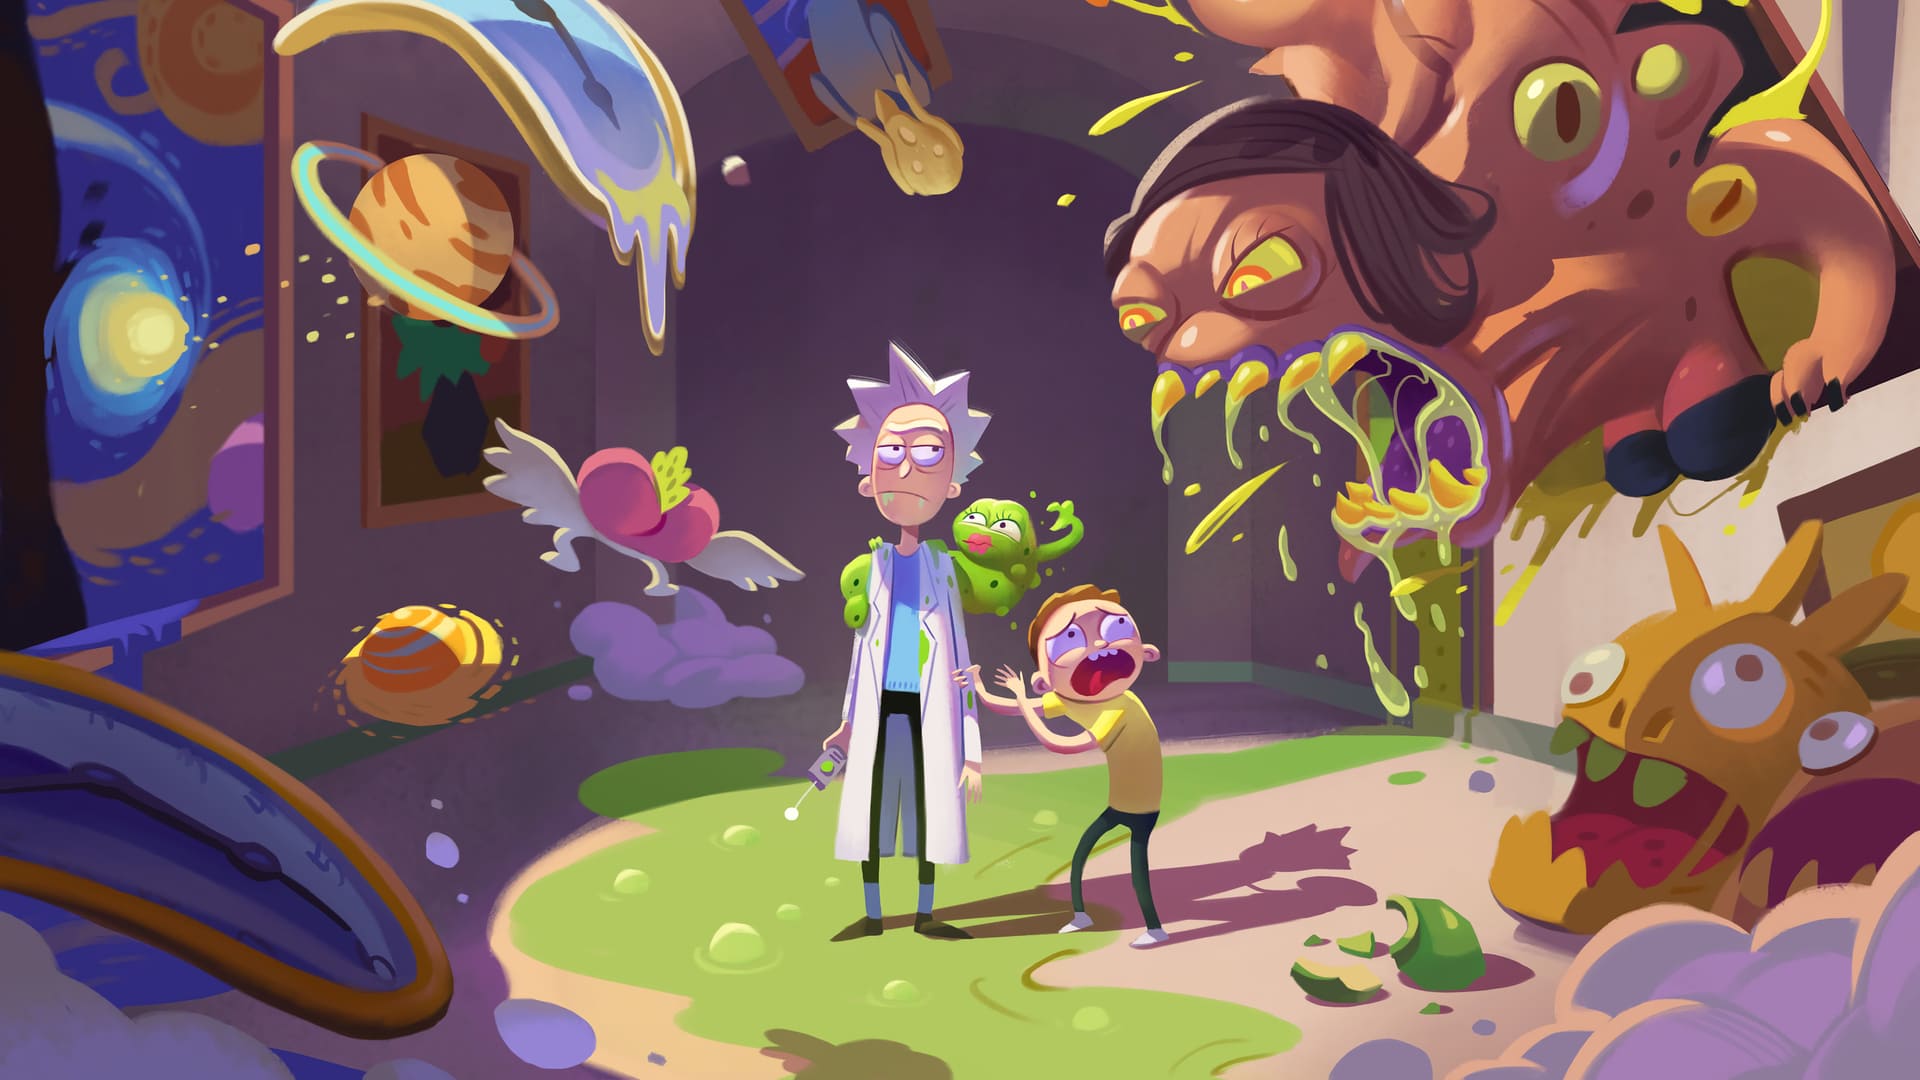 Rick and Morty Wallpaper For Computer